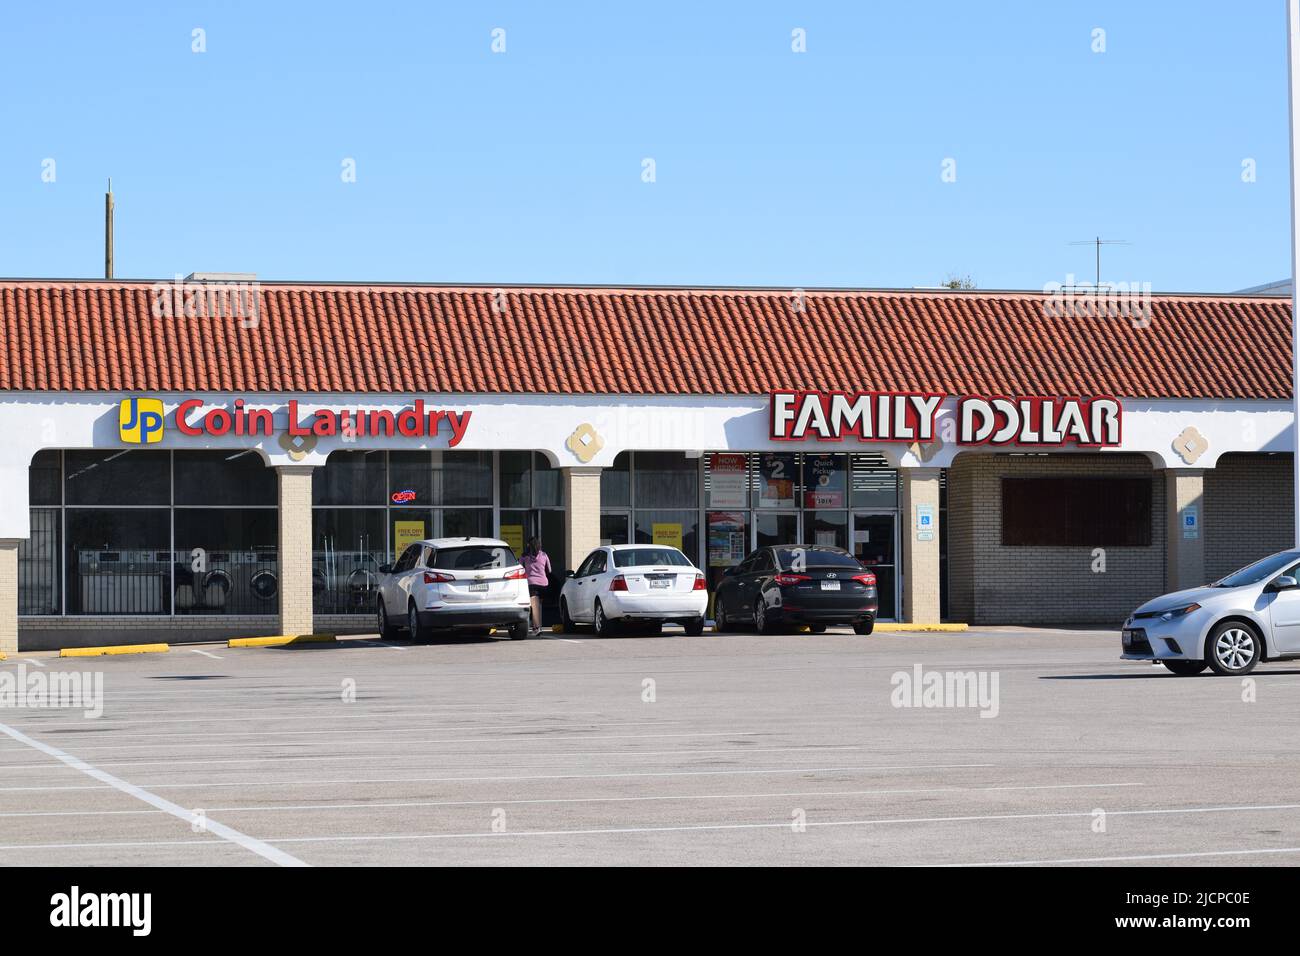 Cars parked in front of a laundromat and a Family Dollar store Stock Photo